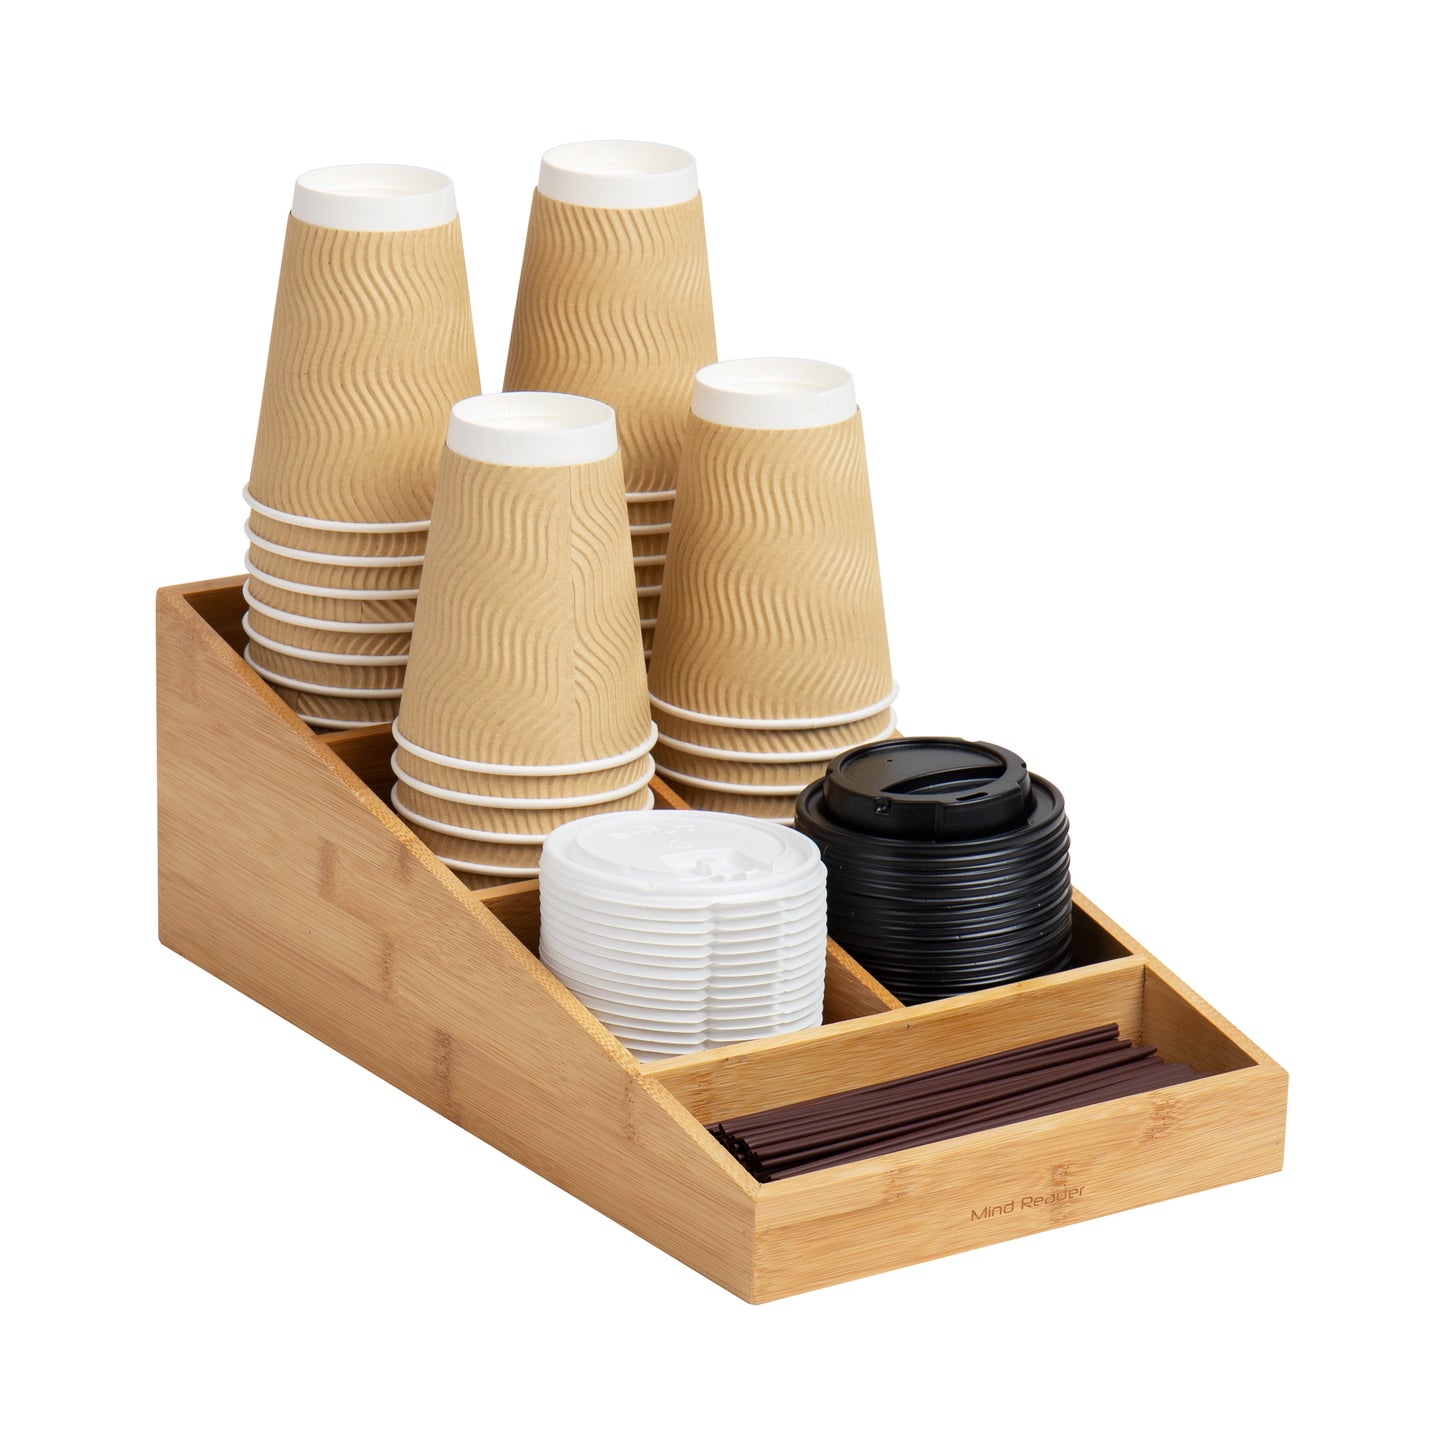 Mind Reader Bali Collection, 7-Compartment, Bamboo Cup and Condiment Storage, Countertop Organizer, Brown